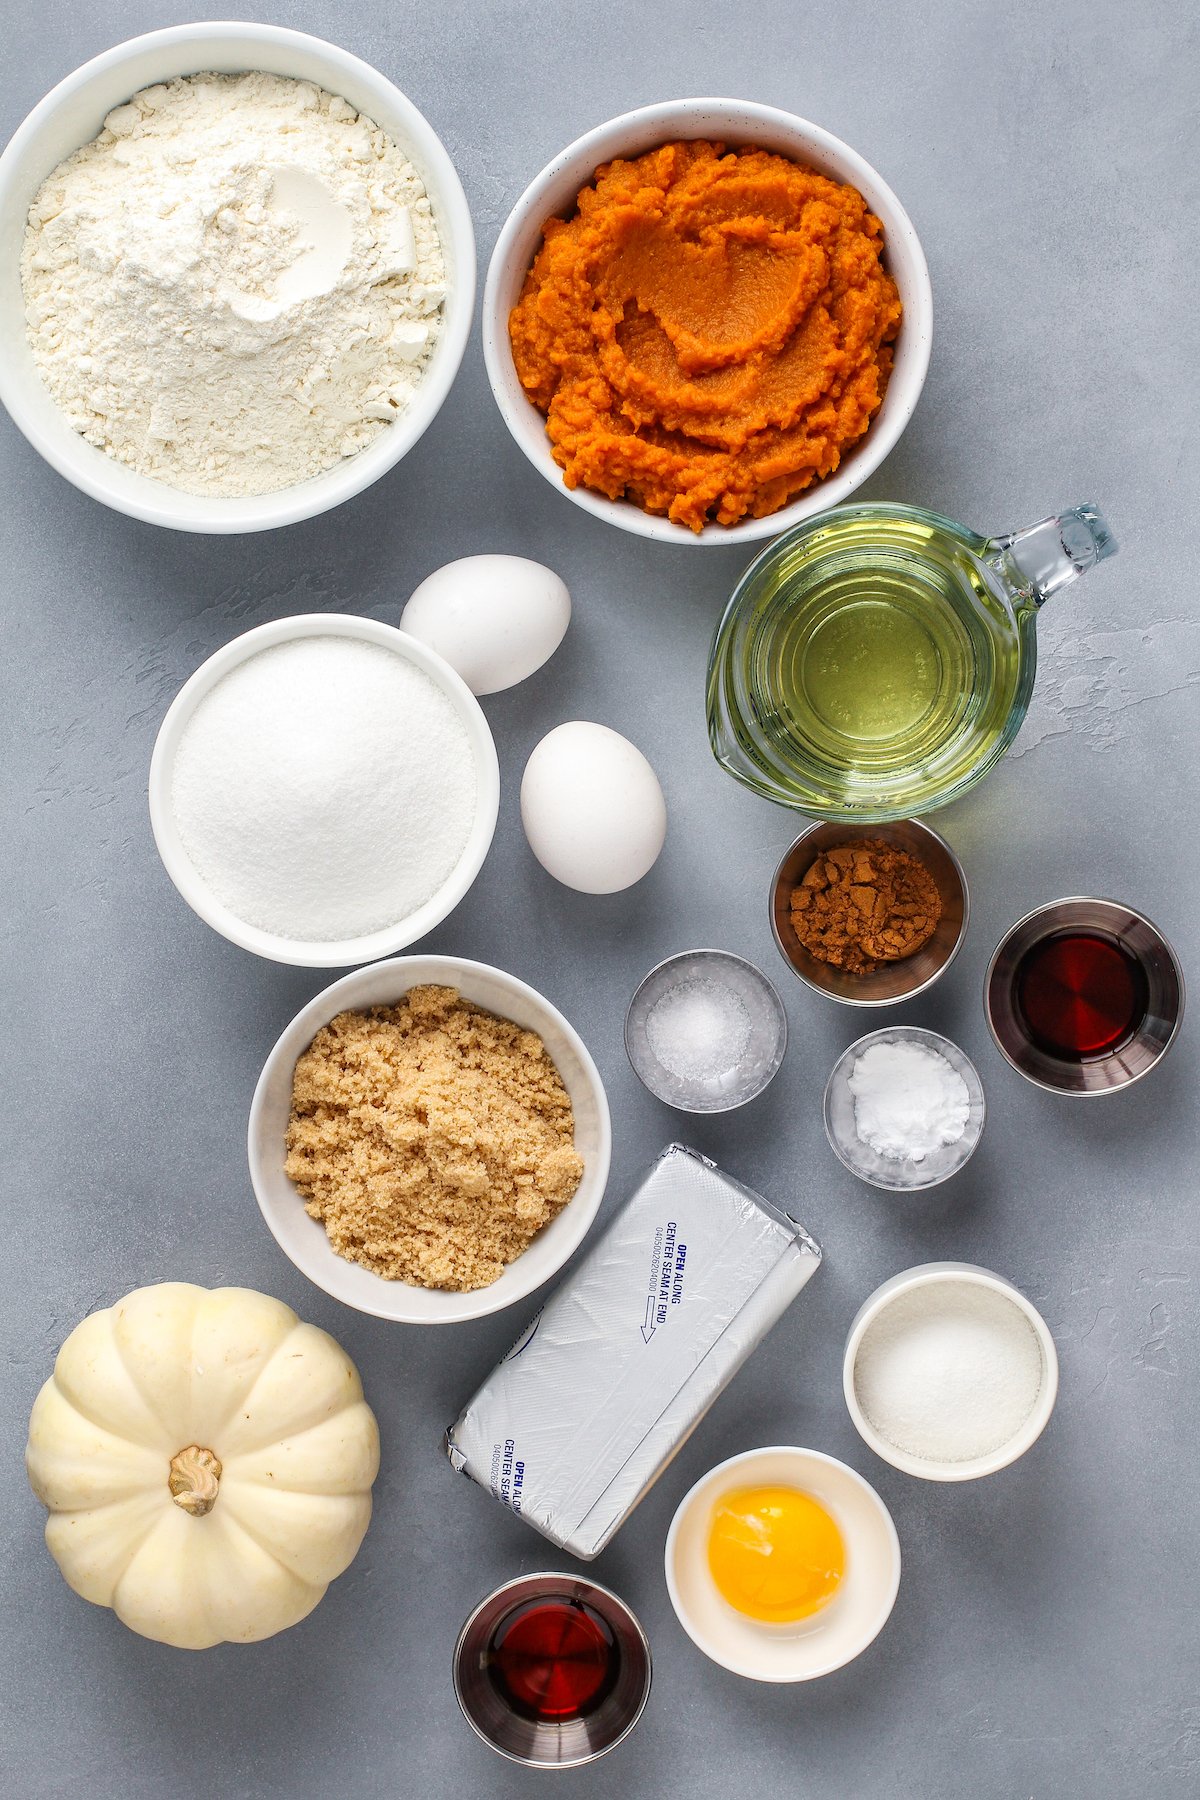 Ingredients arranged in bowls on a countertop.